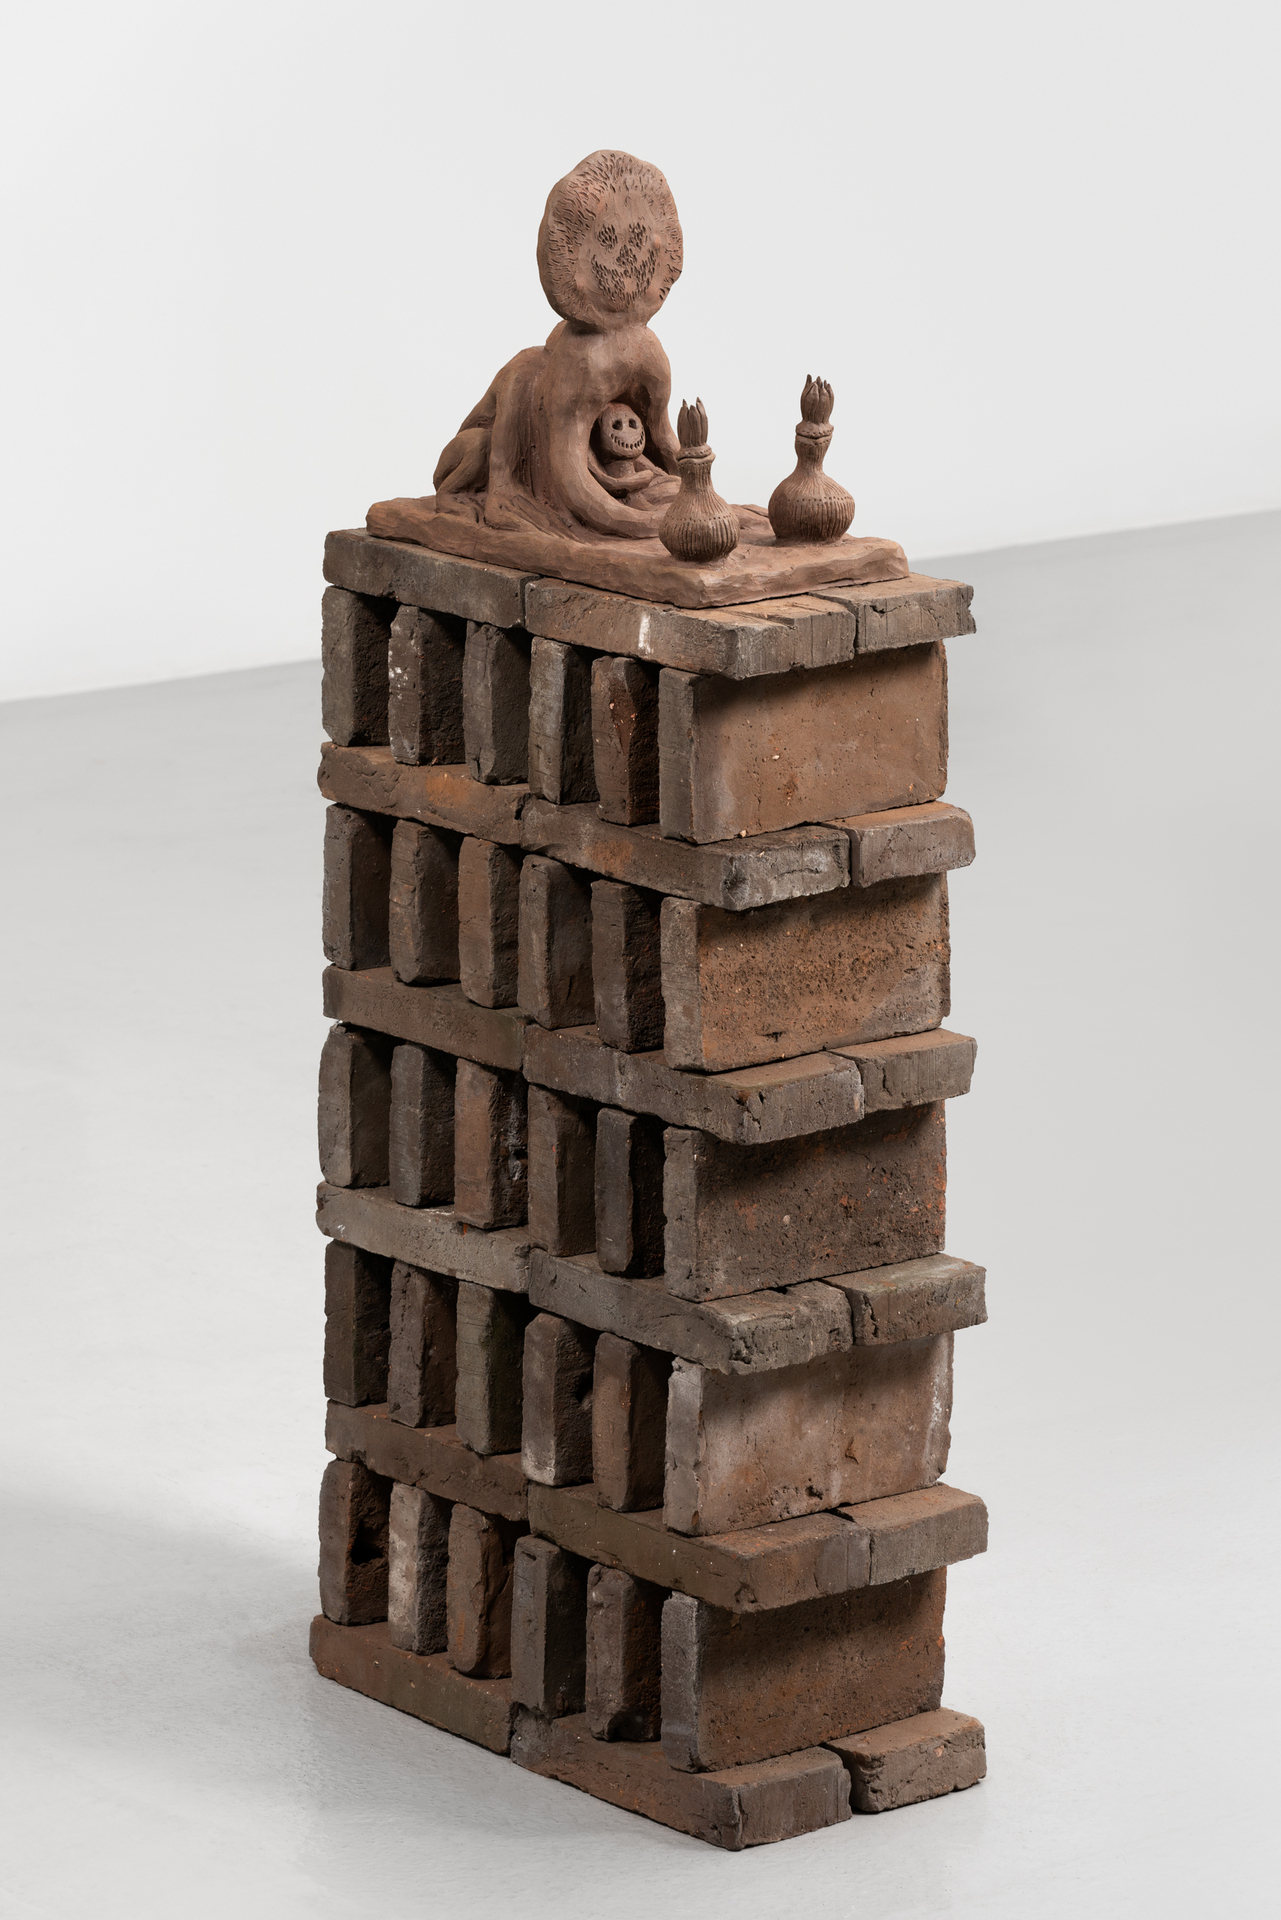 Frederik Exner, Brothers, 2019, fired clay, 29 x 20 x 38 cm